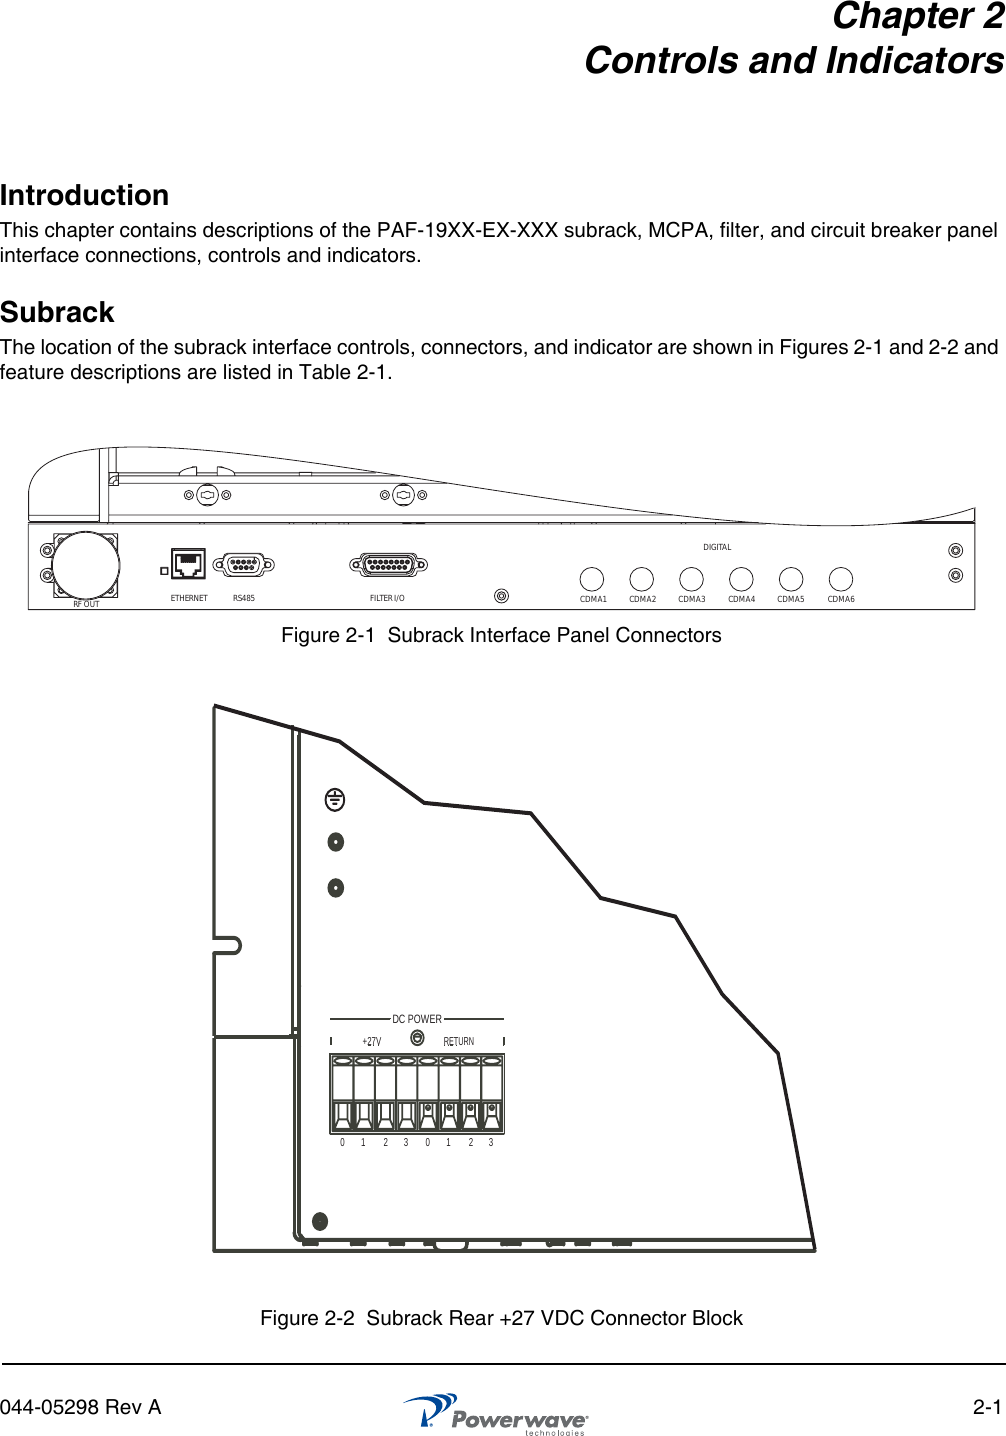 044-05298 Rev A 2-1Chapter 2Controls and IndicatorsIntroductionThis chapter contains descriptions of the PAF-19XX-EX-XXX subrack, MCPA, filter, and circuit breaker panel interface connections, controls and indicators. Subrack The location of the subrack interface controls, connectors, and indicator are shown in Figures 2-1 and 2-2 and feature descriptions are listed in Table 2-1.Figure 2-1  Subrack Interface Panel ConnectorsFigure 2-2  Subrack Rear +27 VDC Connector Block RF OUTETHERNET  RS485 FILTER I/O CDMA1 CDMA2 CDMA3 CDMA4 CDMA5 CDMA6DIGITALDC POWER+27VRETURN01230123